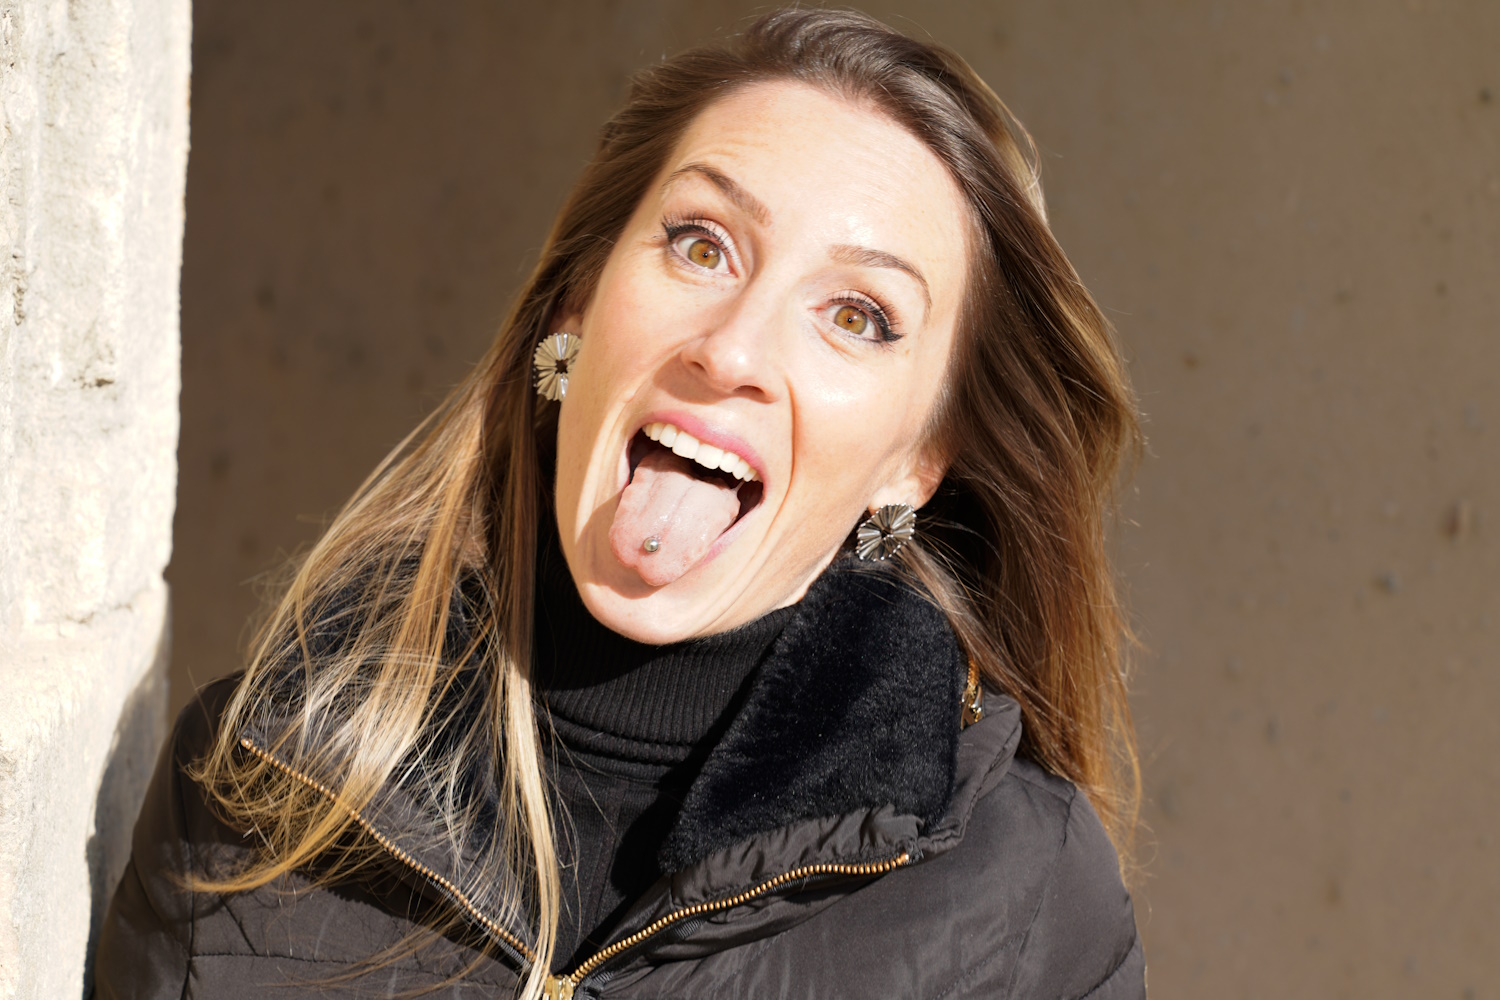 Woman with a black shirt in a jacket with tongue piercing sticking her tongue out.